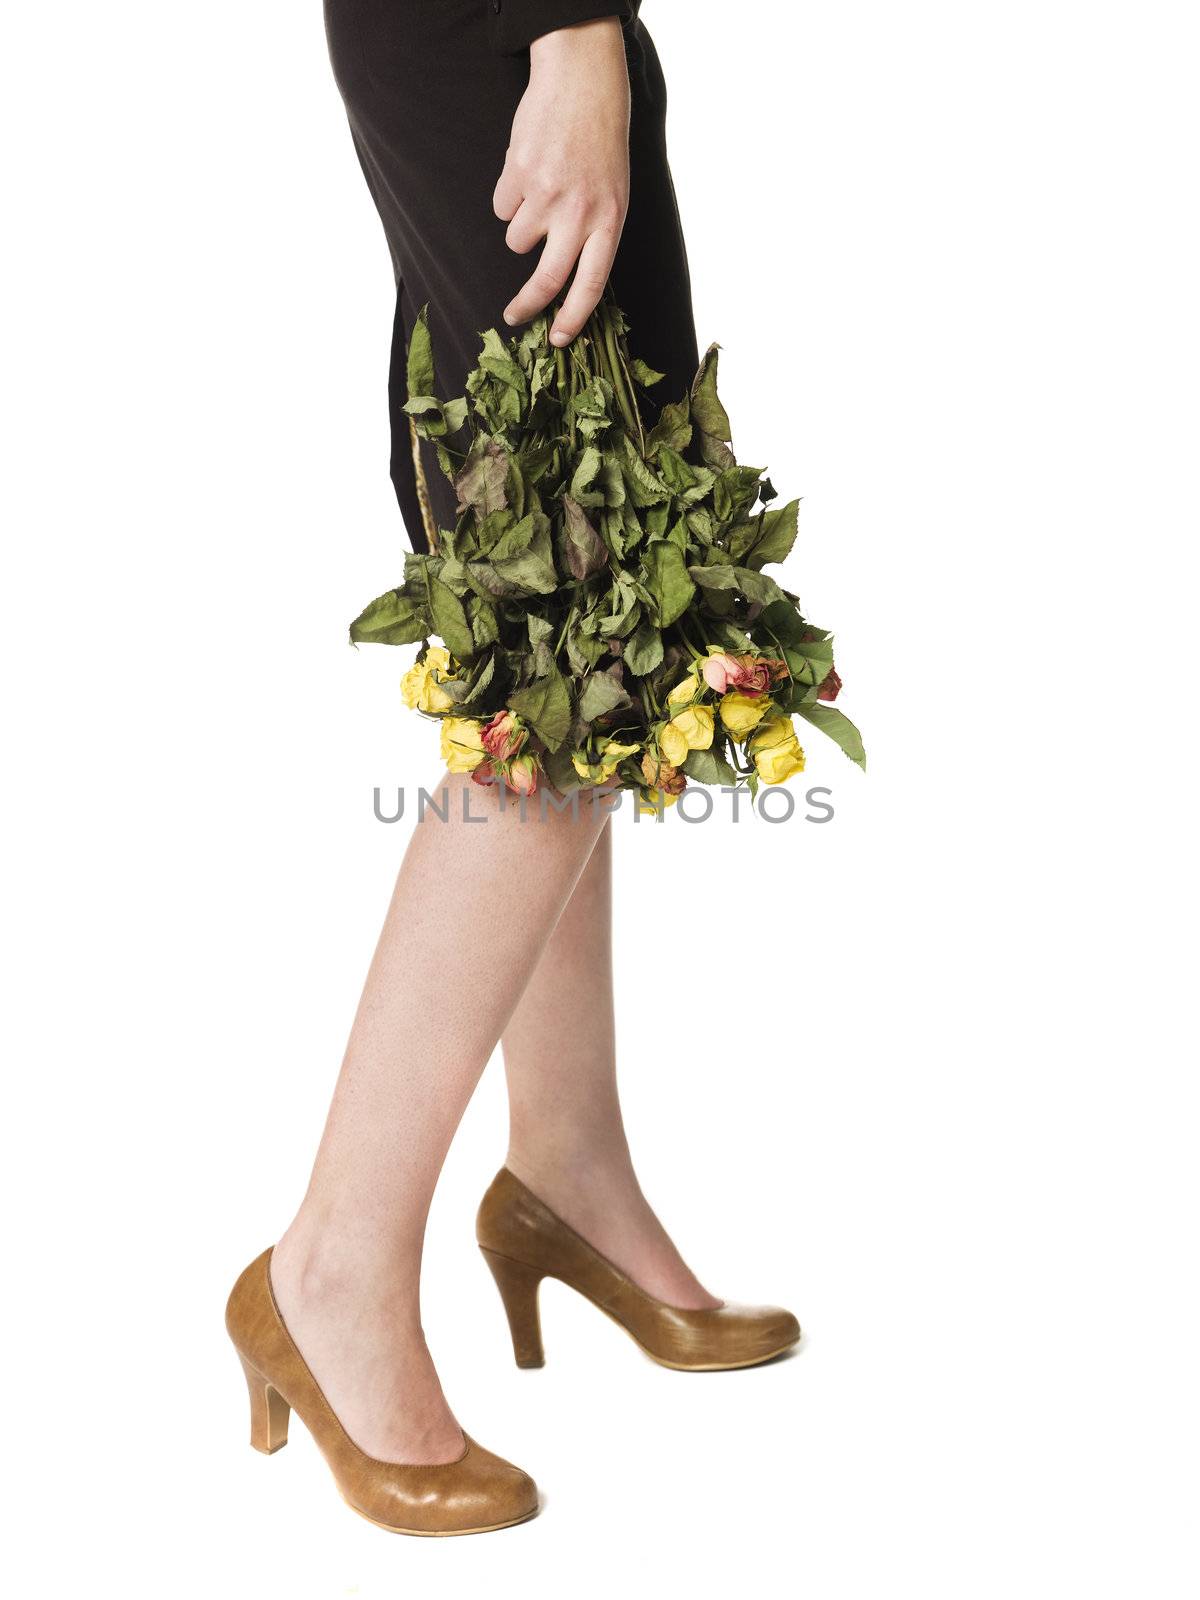 Woman holding a bunch of dead flowers